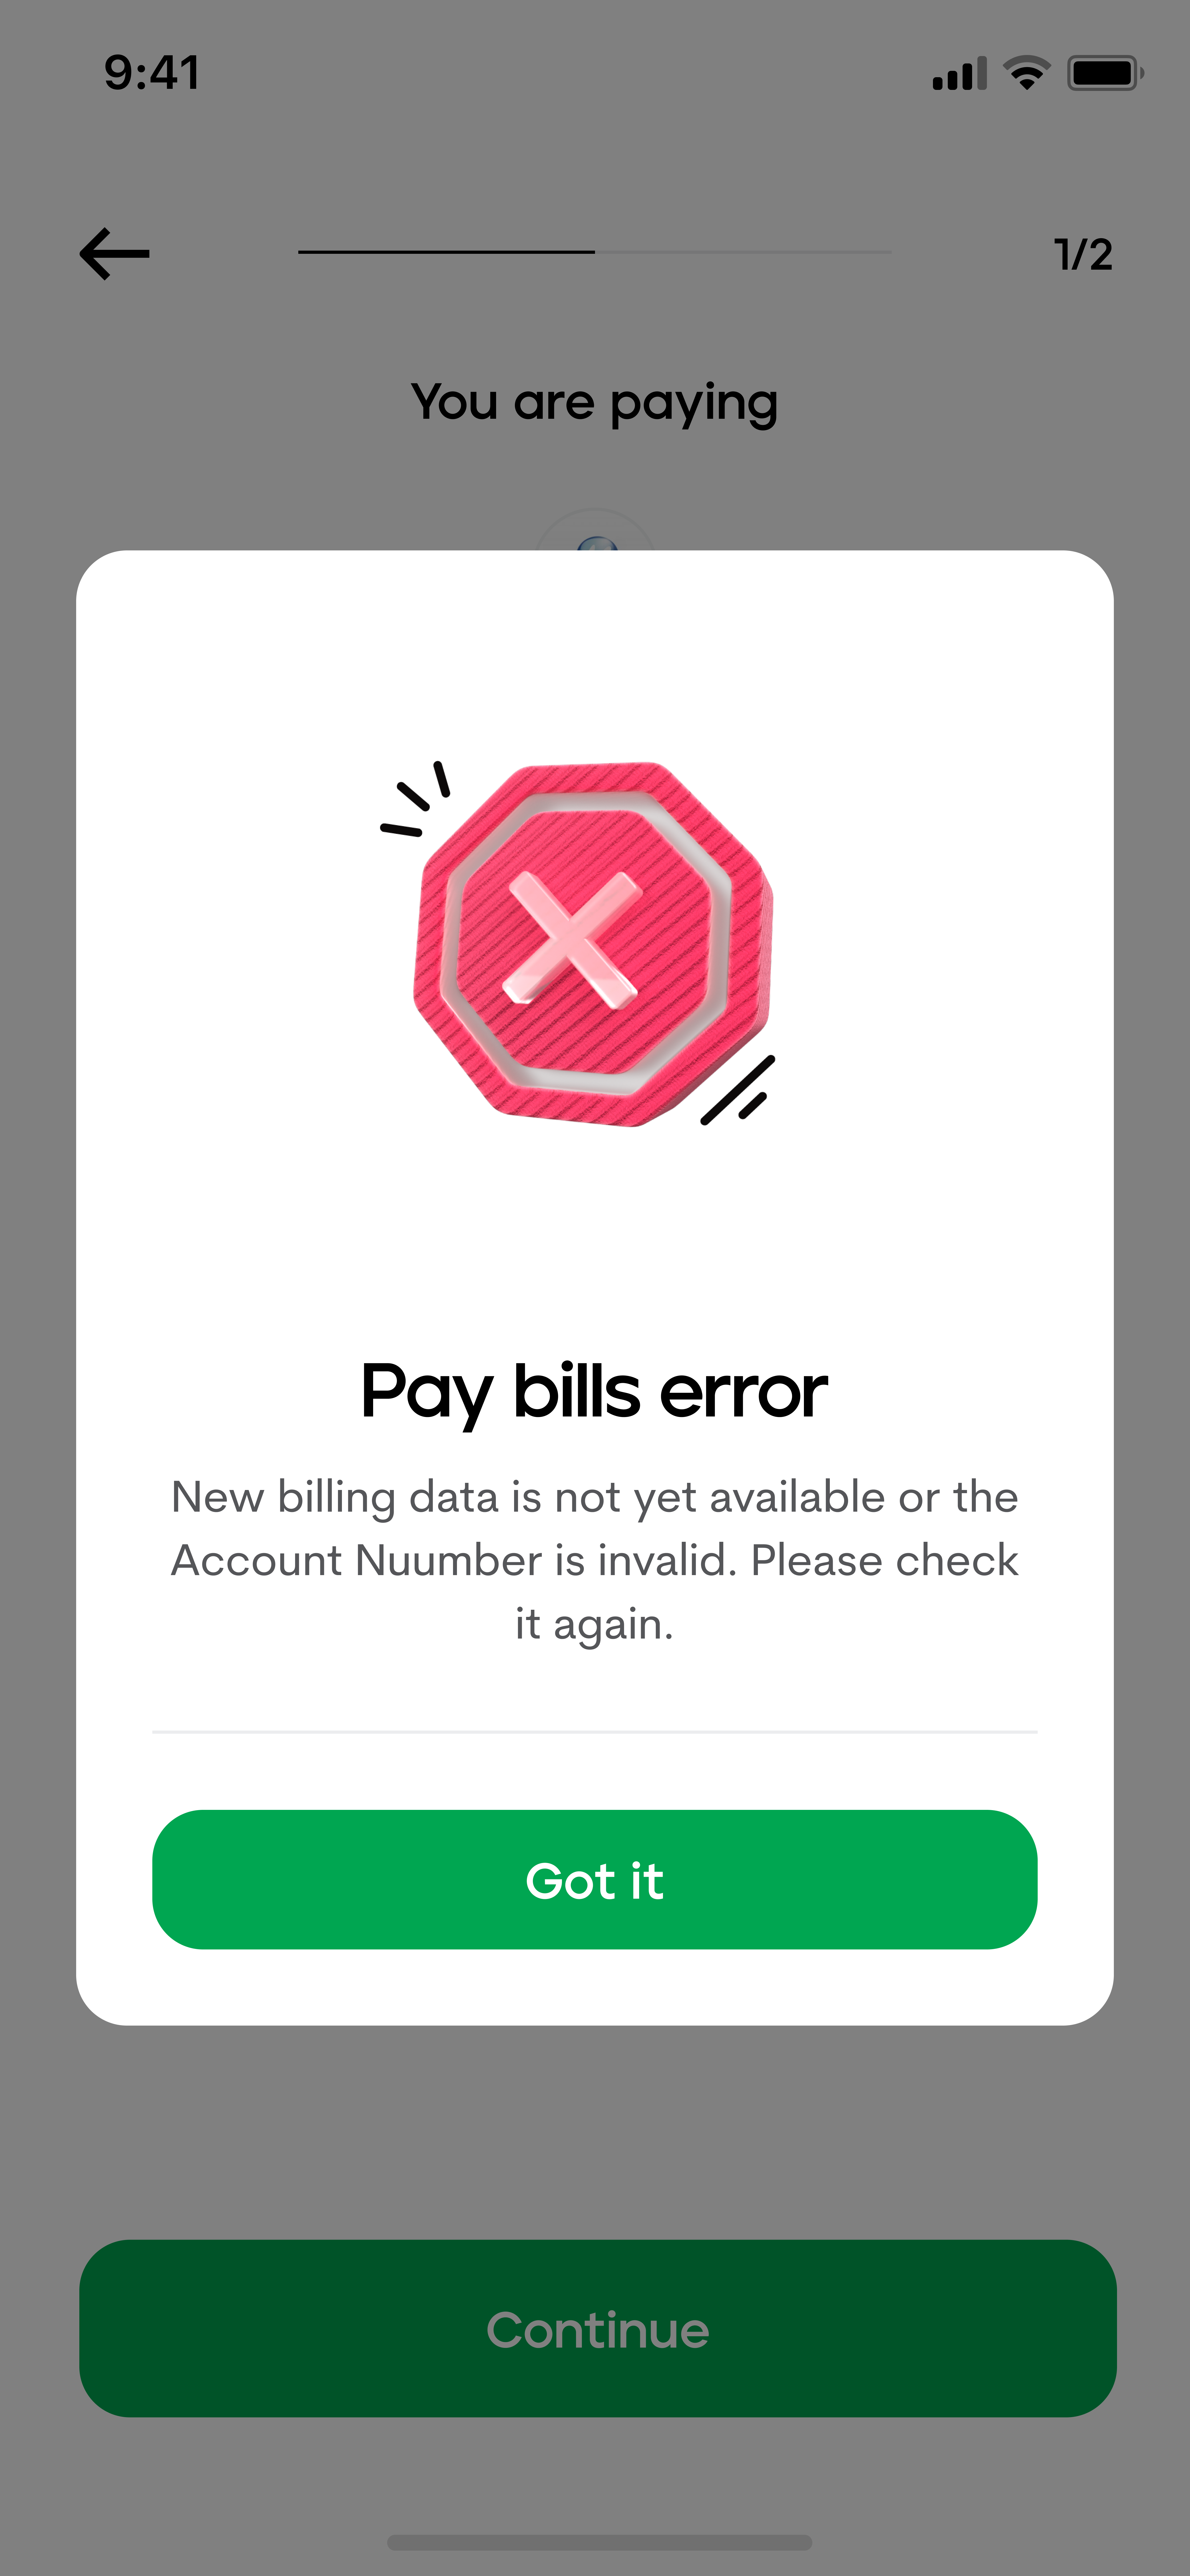 Yes, the bill payment encountered an error but what does that mean?